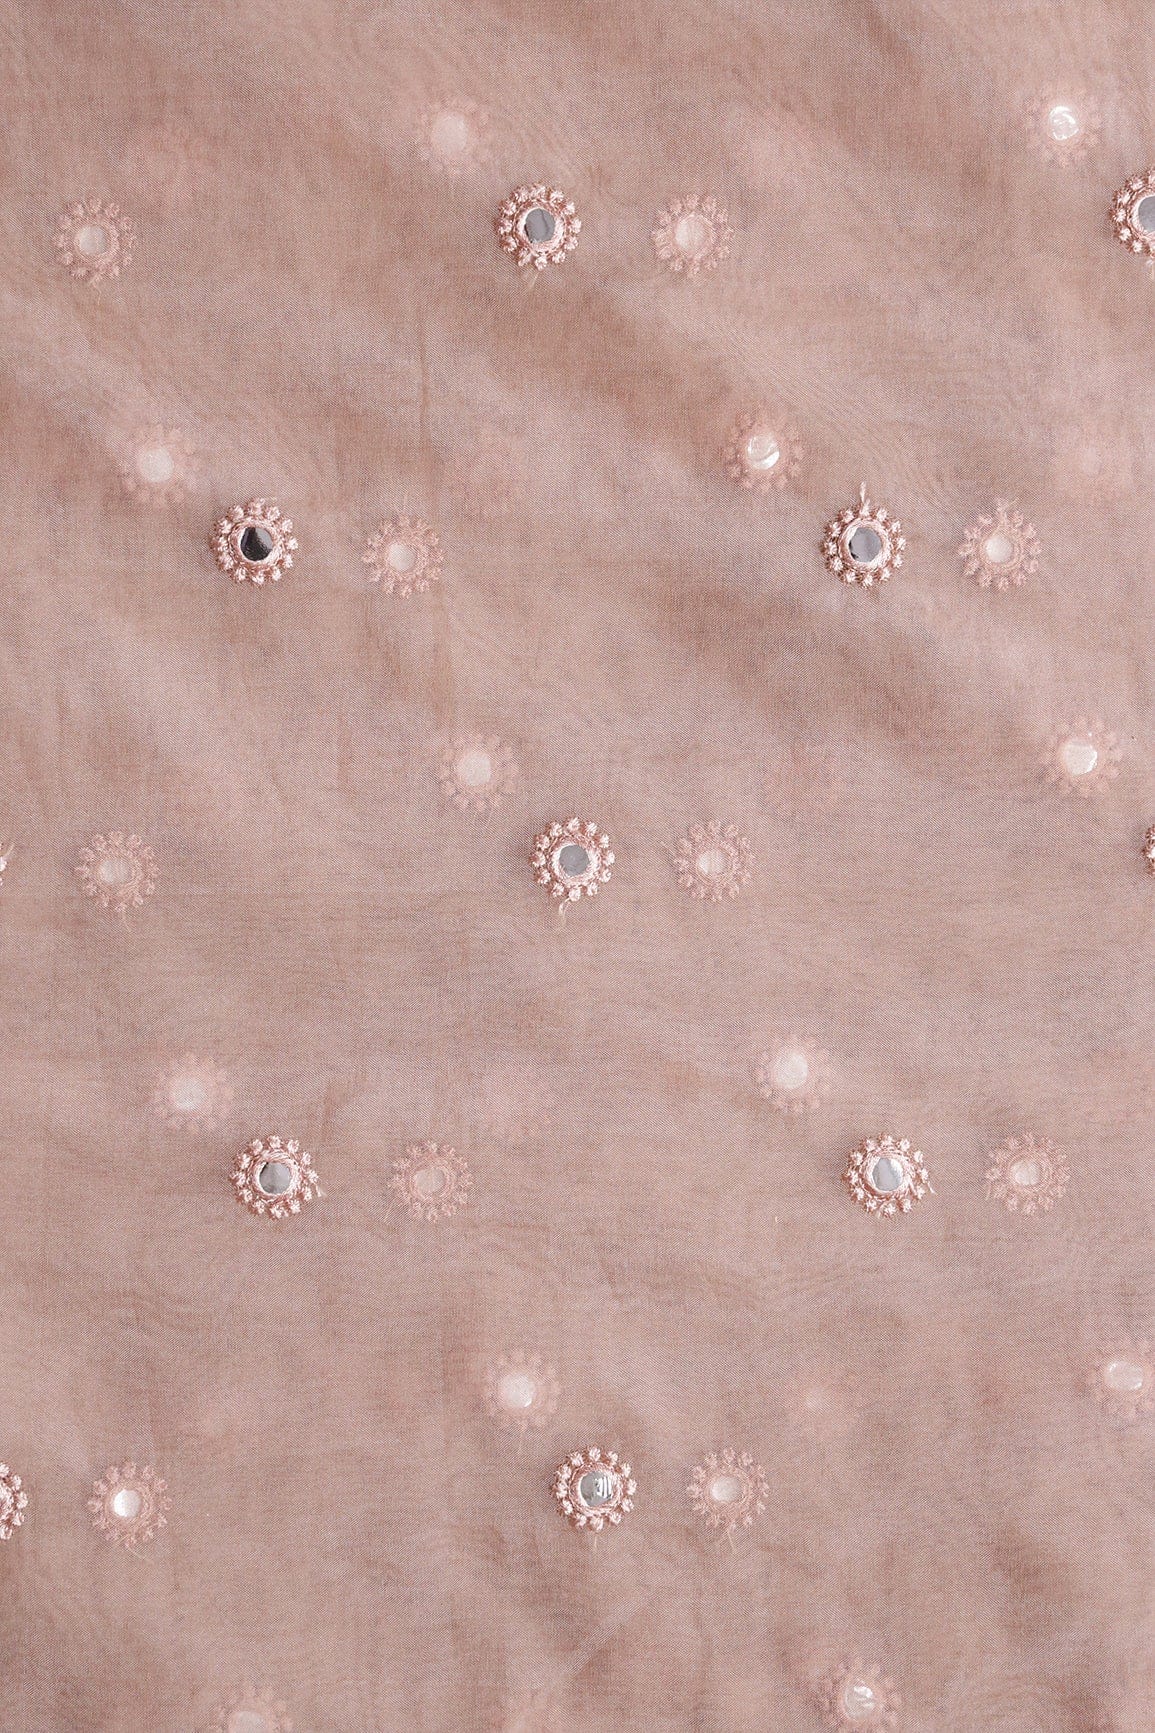 doeraa Embroidery Fabrics Light Brown Thread With Foil Mirror Work Small Motif Embroidery On Light Brown Organza Fabric